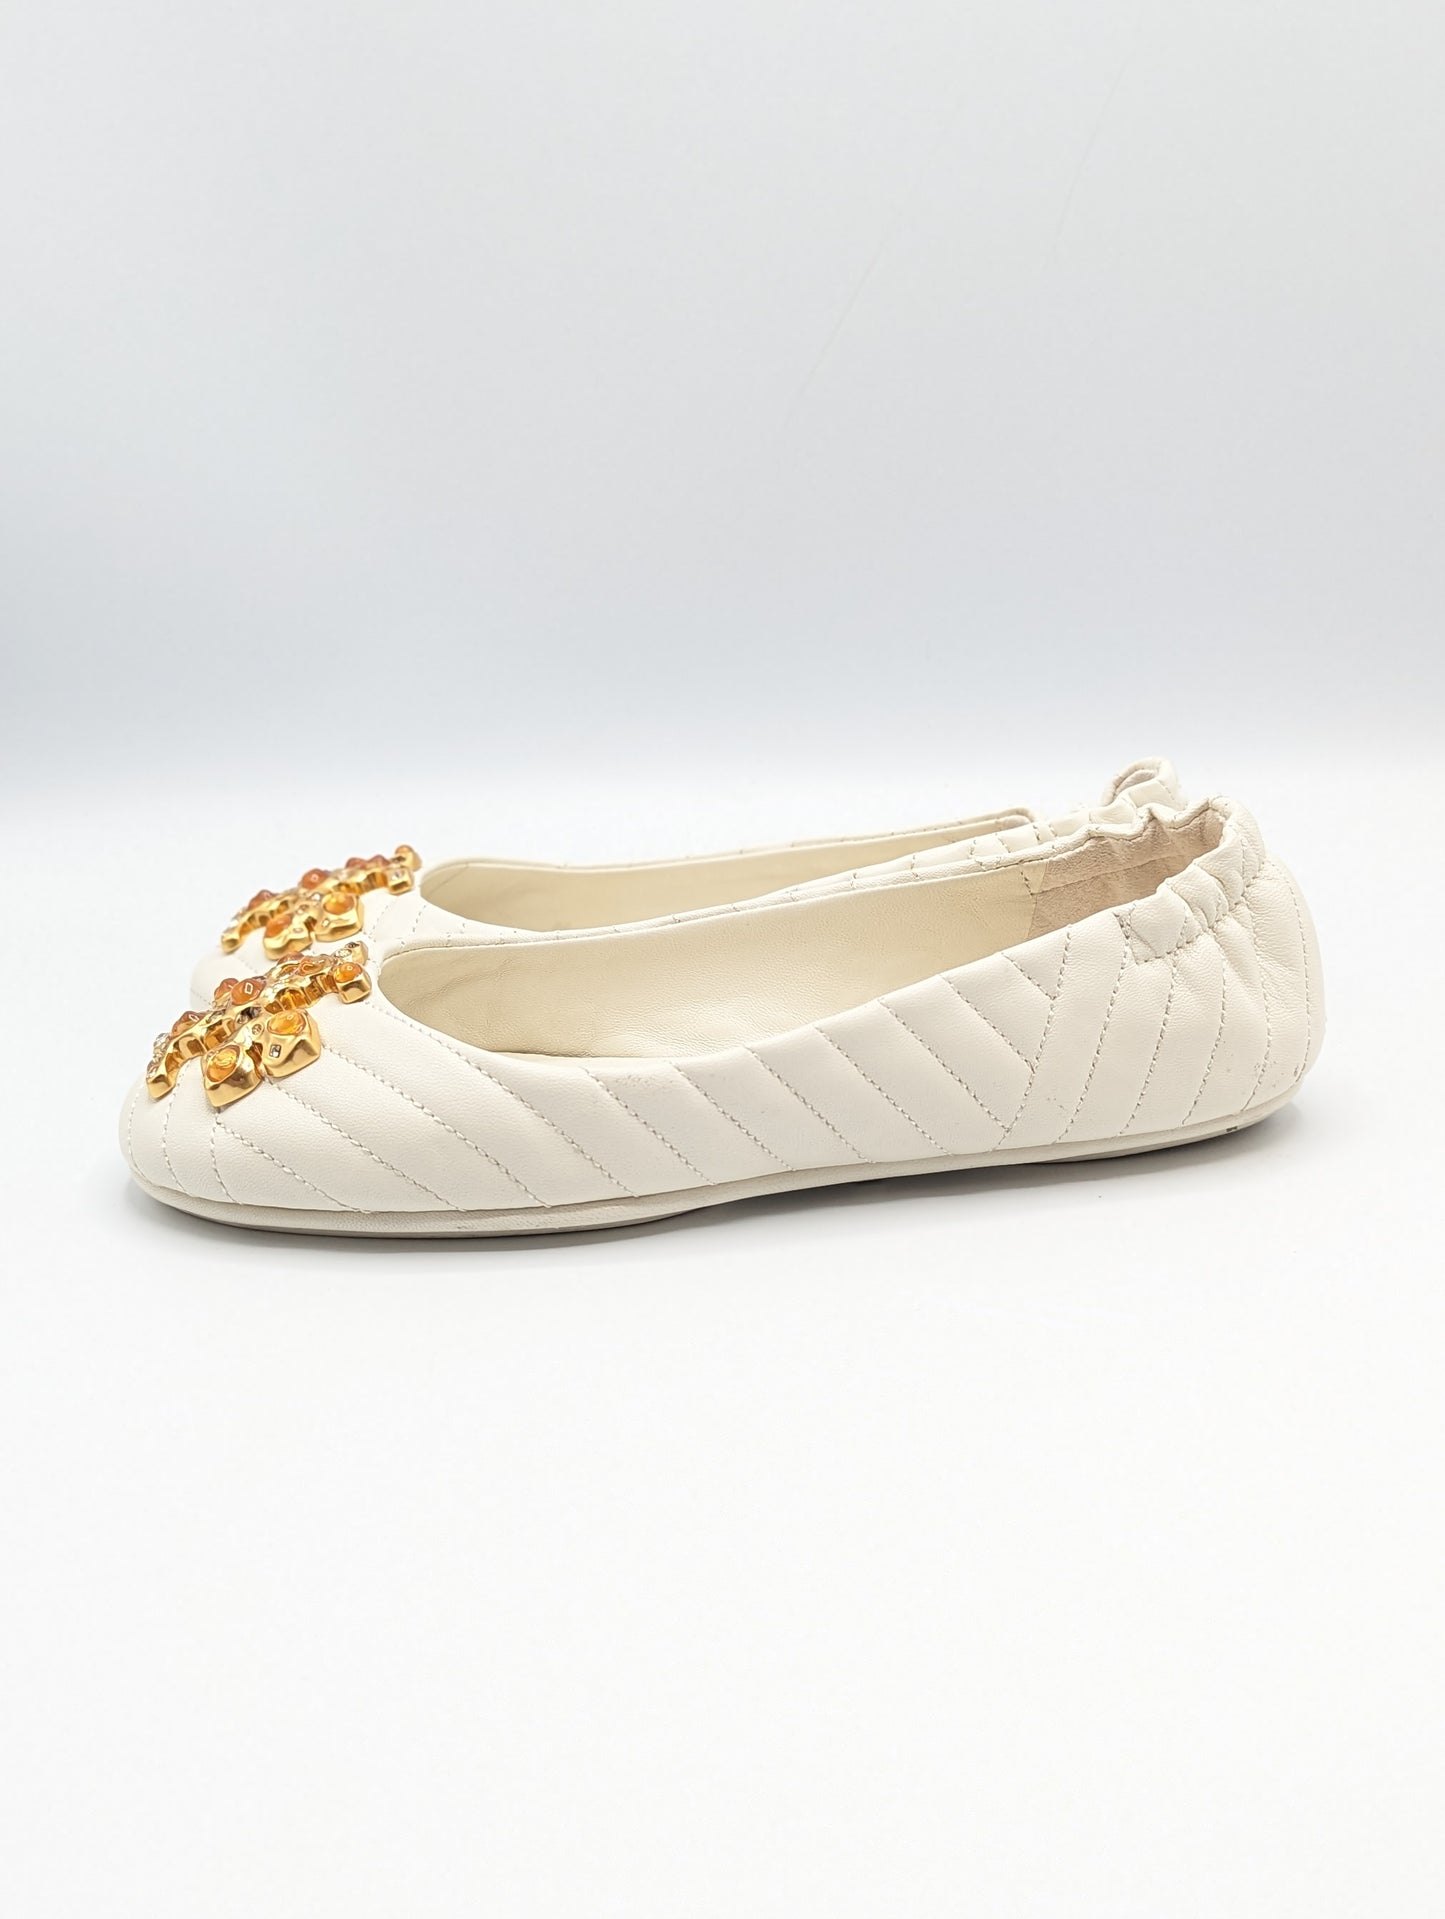 Tory Burch Cream Queens Day Flats Size 7